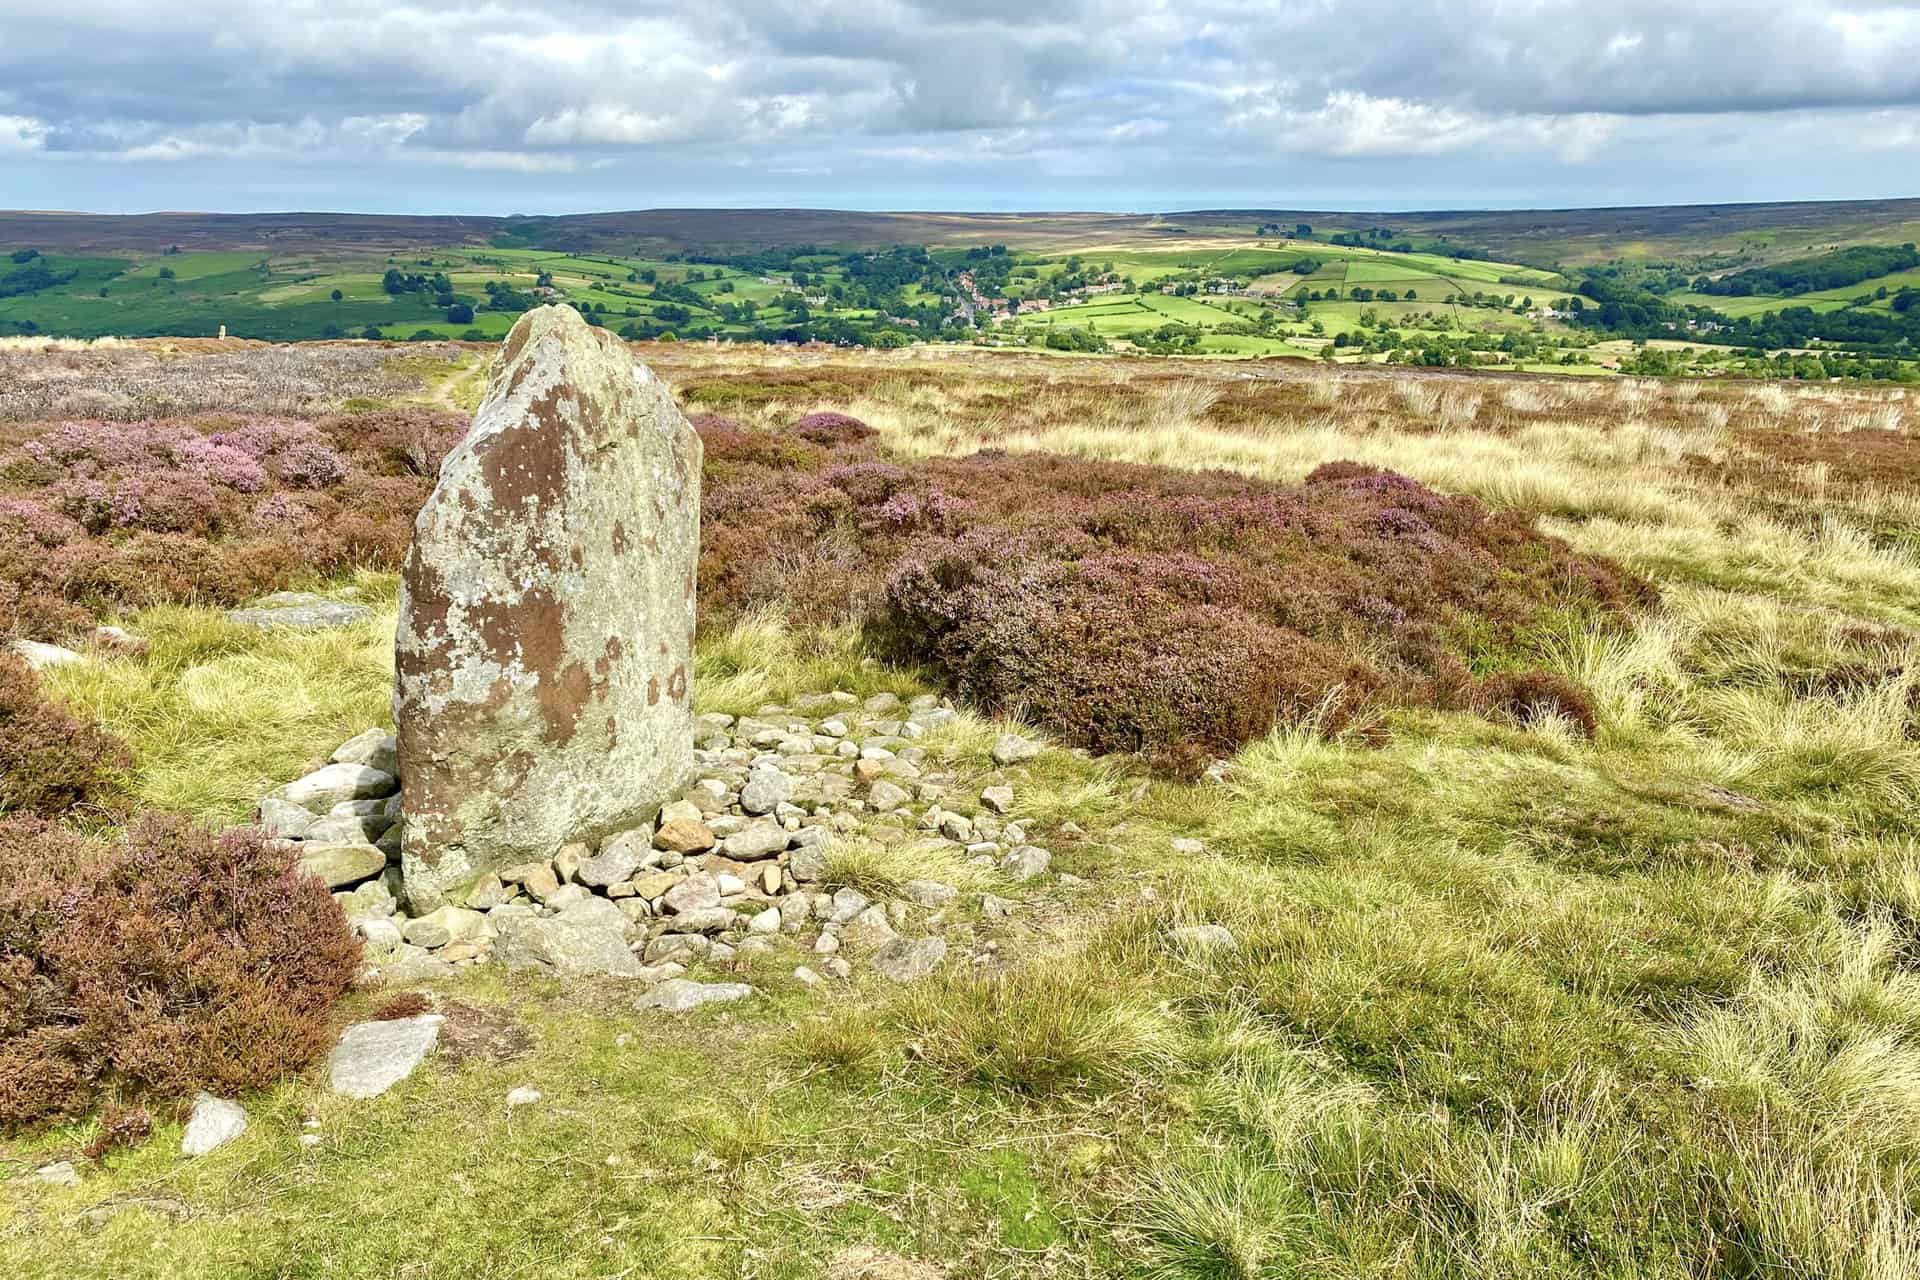 The view of Danby, Esk Dale and Danby Low Moor from the standing stone on Ainthorpe Rigg.